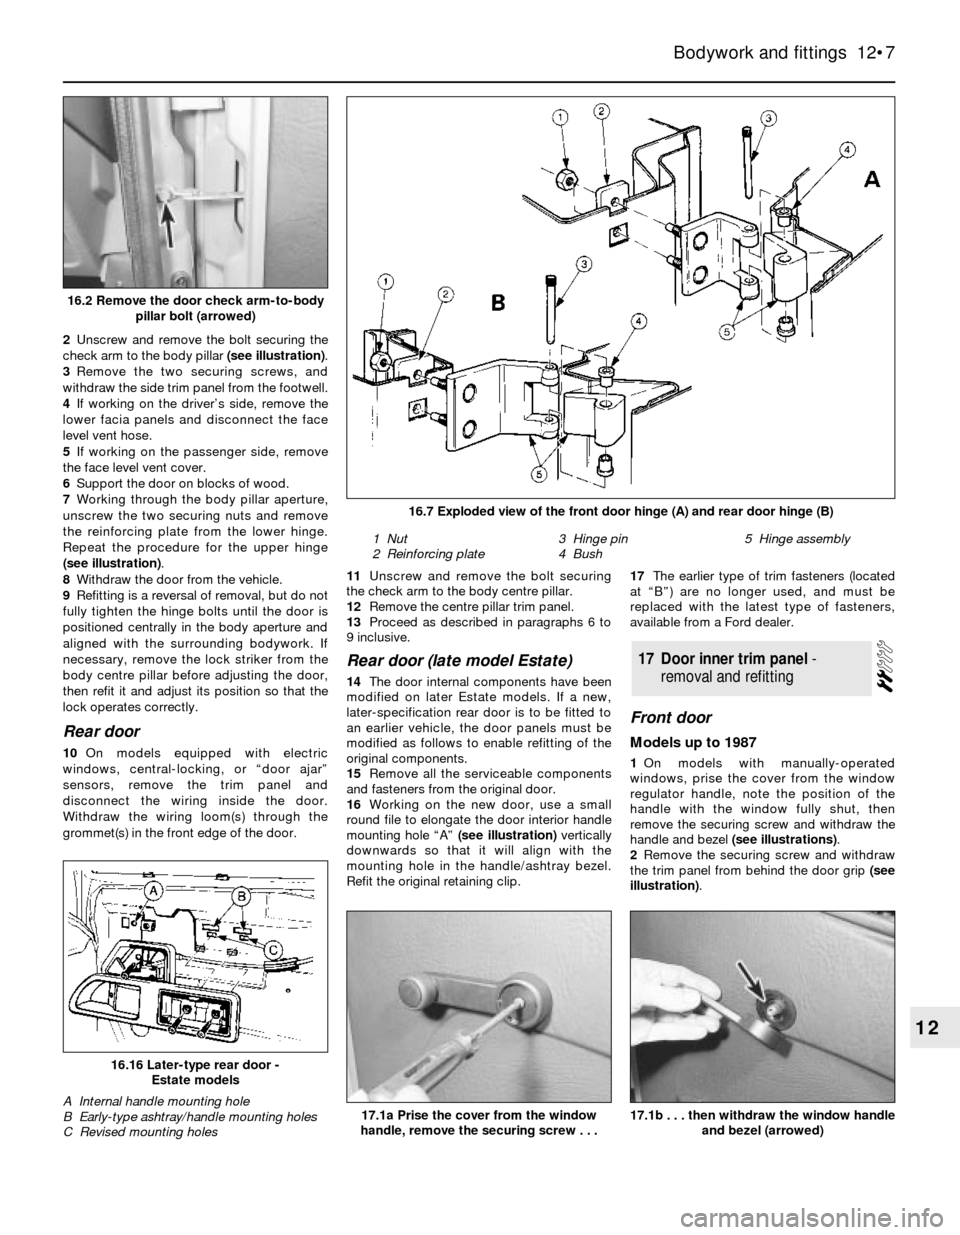 FORD SIERRA 1988 2.G Bodywork And Fittings Workshop Manual 2Unscrew and remove the bolt securing the
check arm to the body pillar (see illustration). 
3Remove the two securing screws, and
withdraw the side trim panel from the footwell. 
4If working on the dri